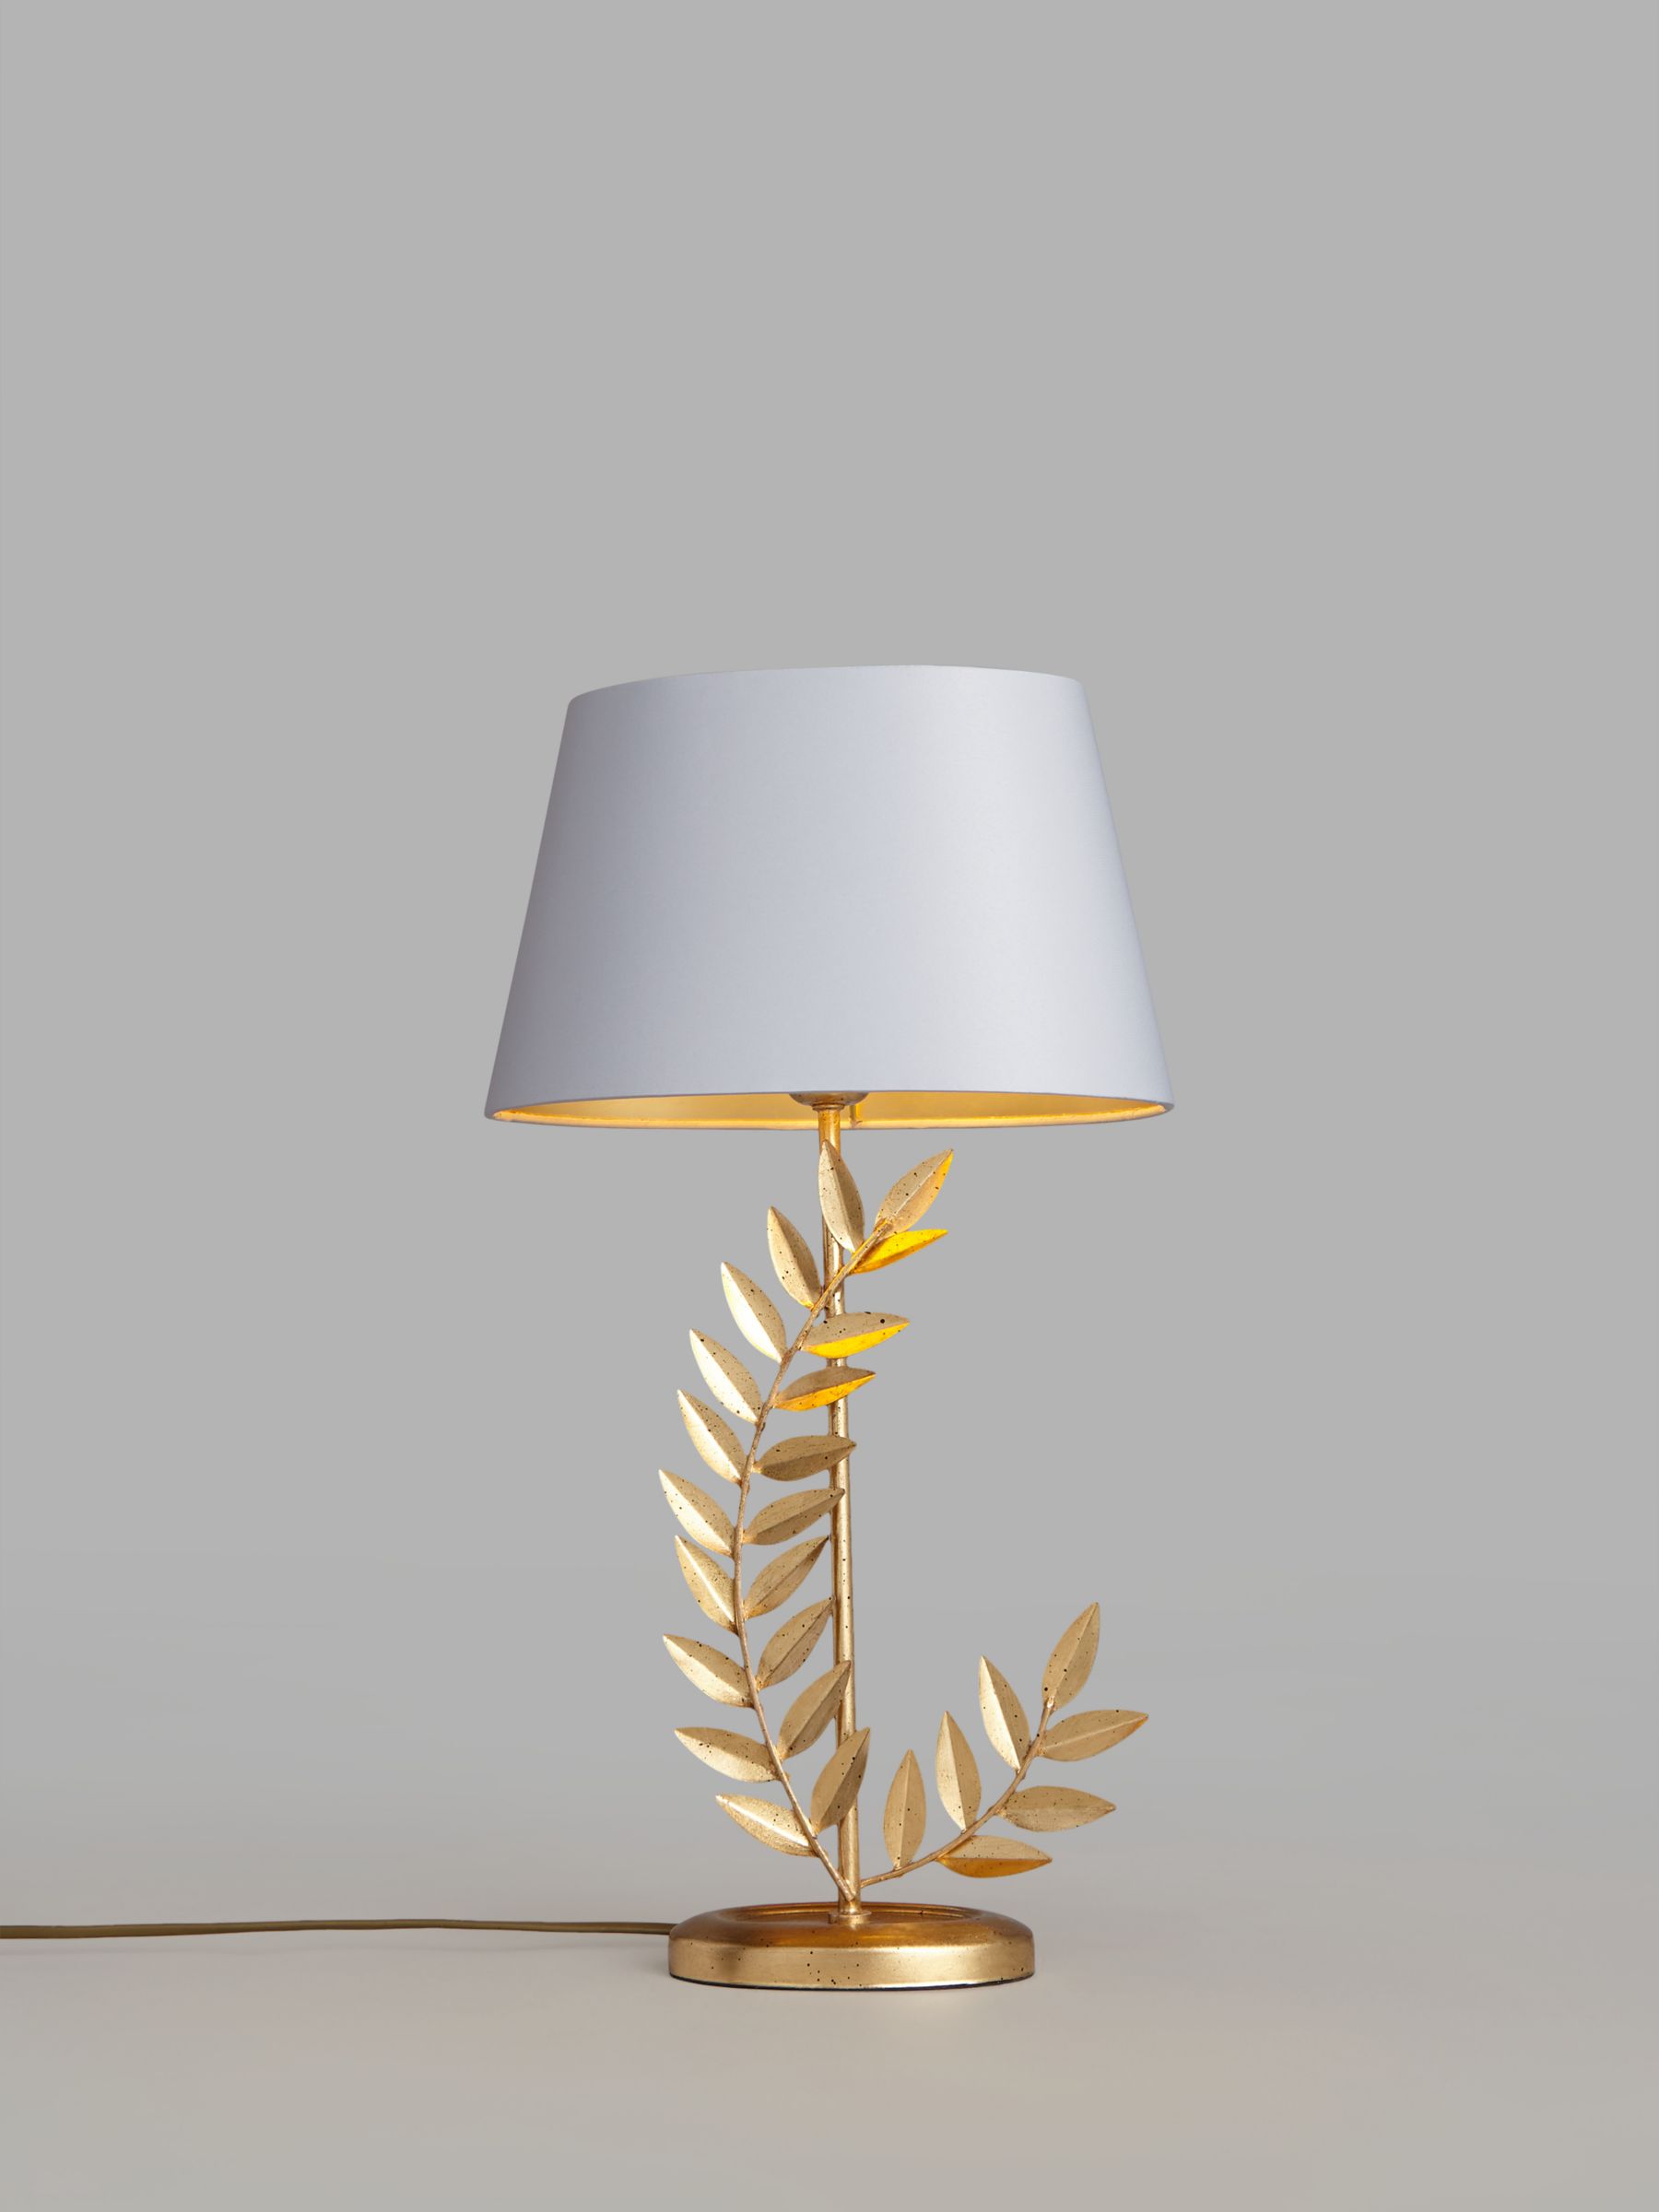 Foliage Table Lamp Gold, John Lewis Table Lamps